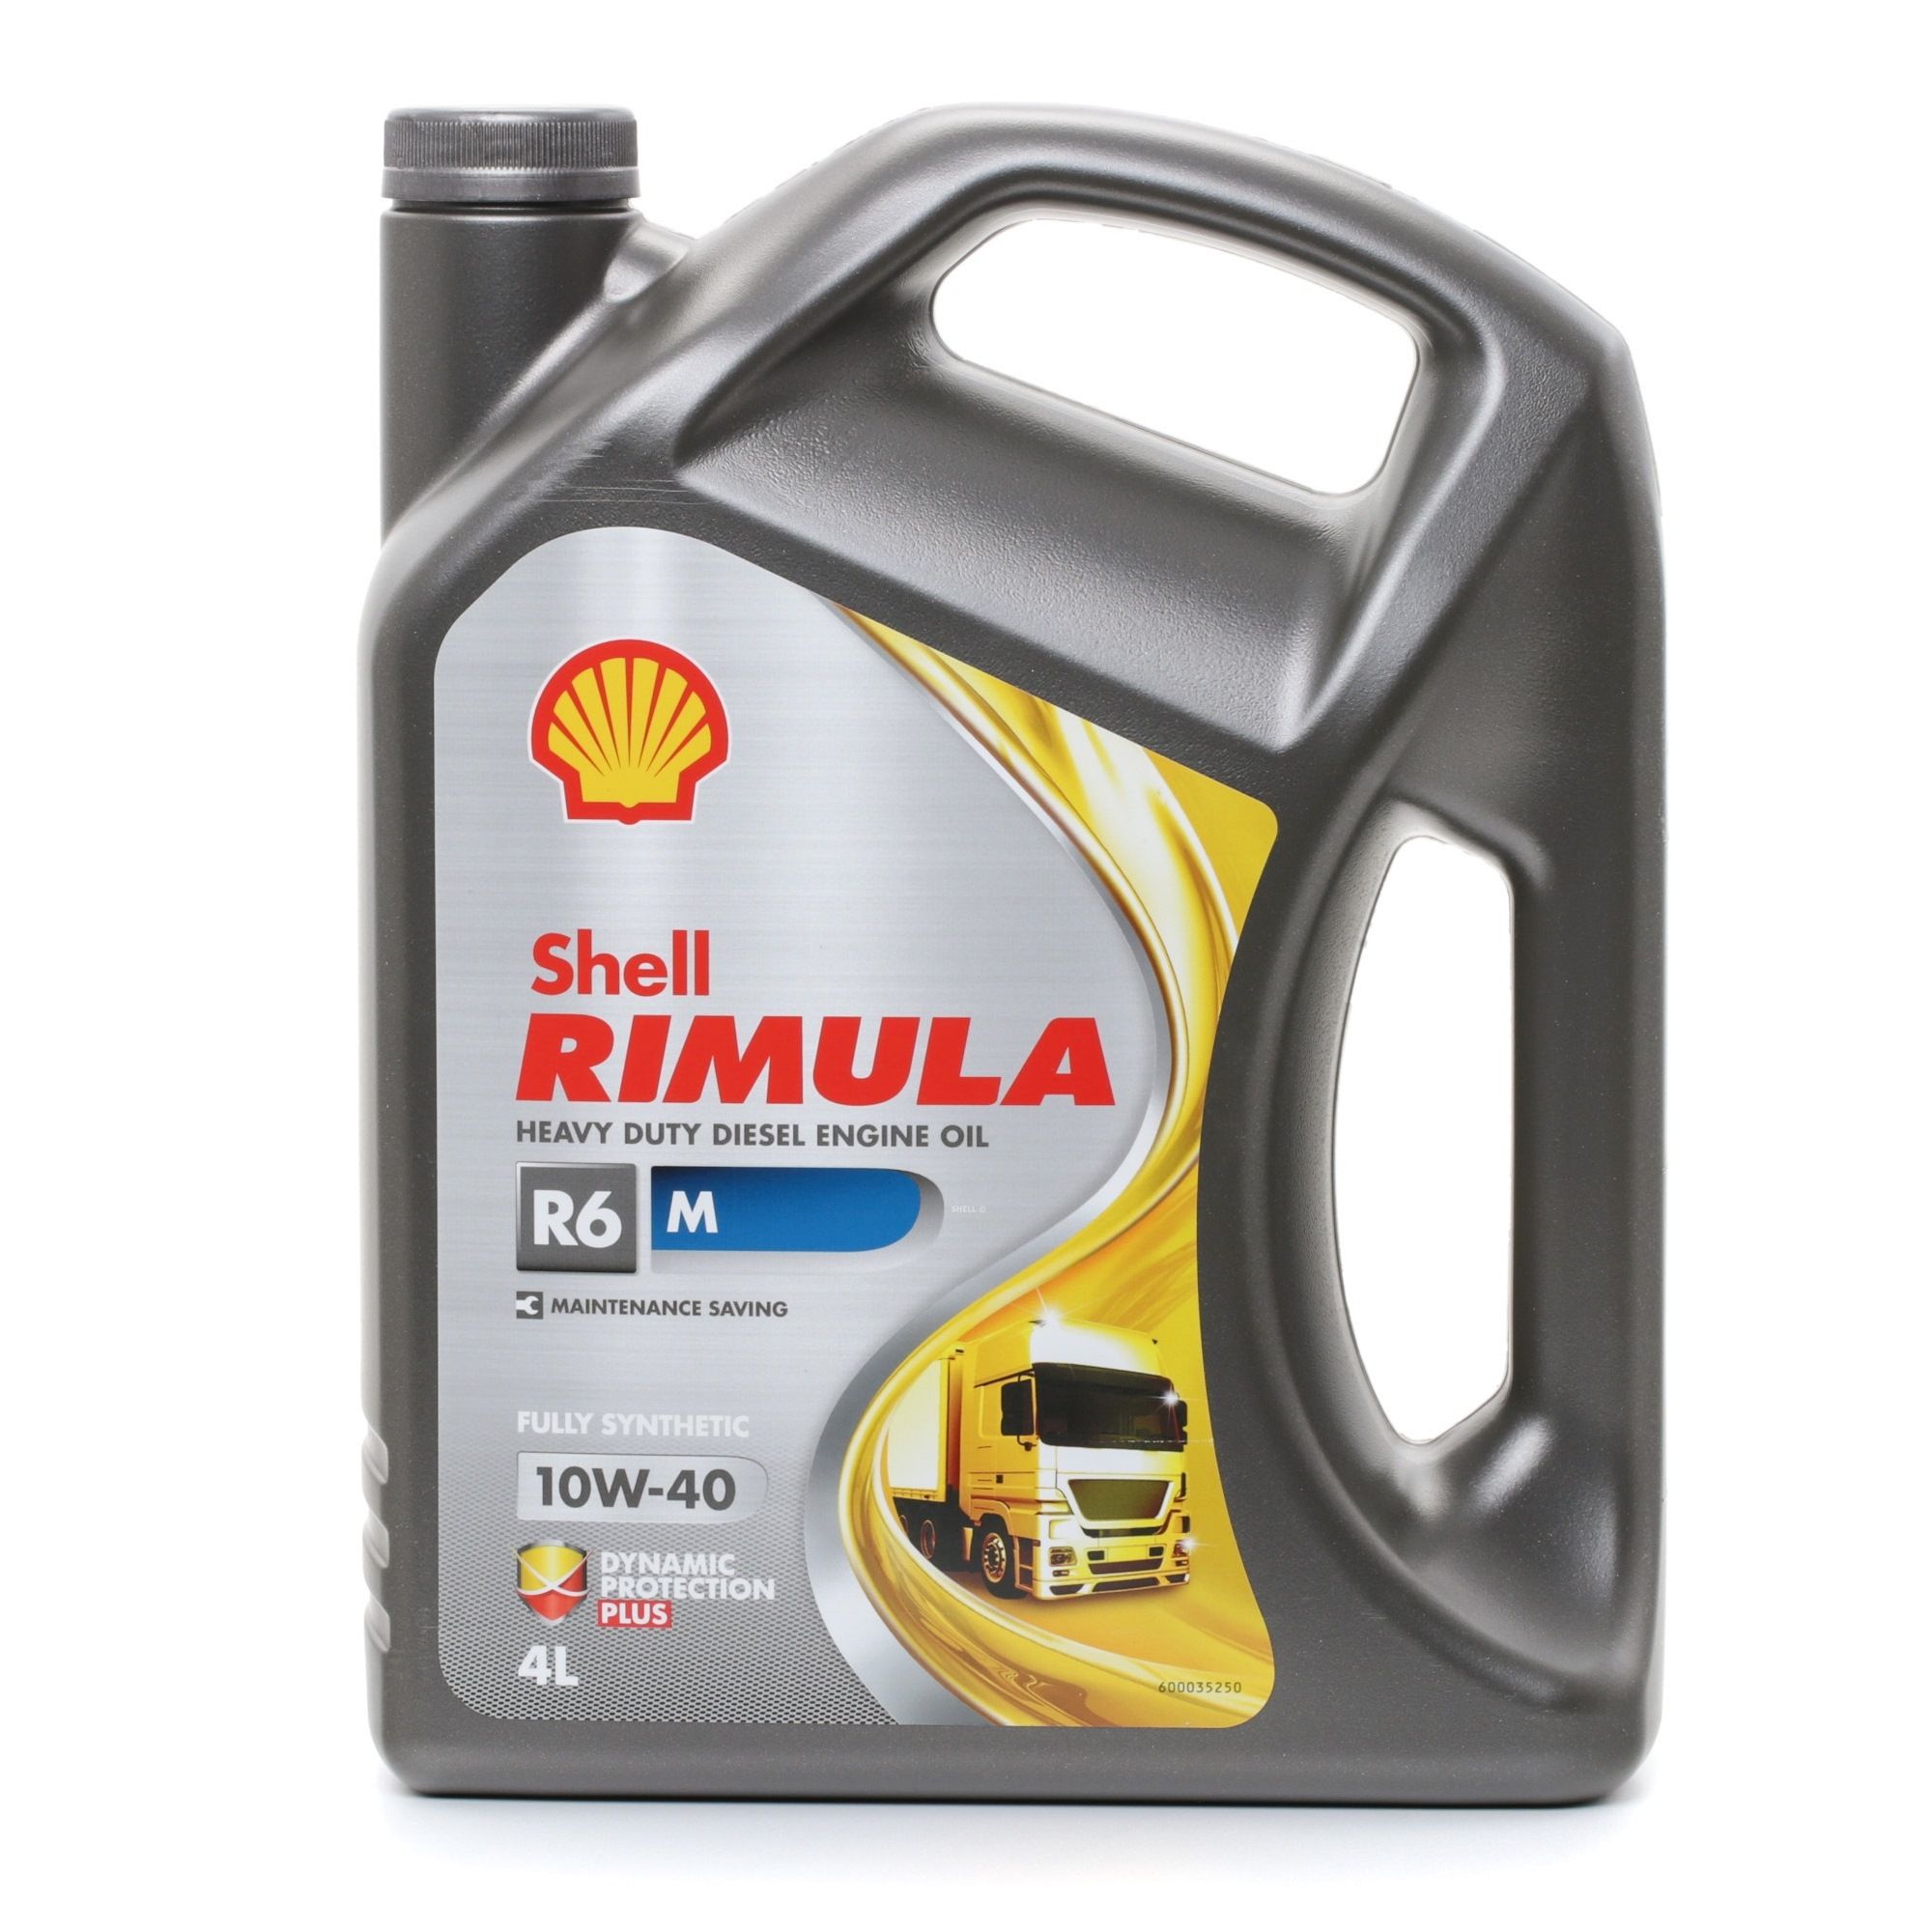 Automobile oil SHELL 10W-40, 4l, Synthetic Oil longlife 550044869